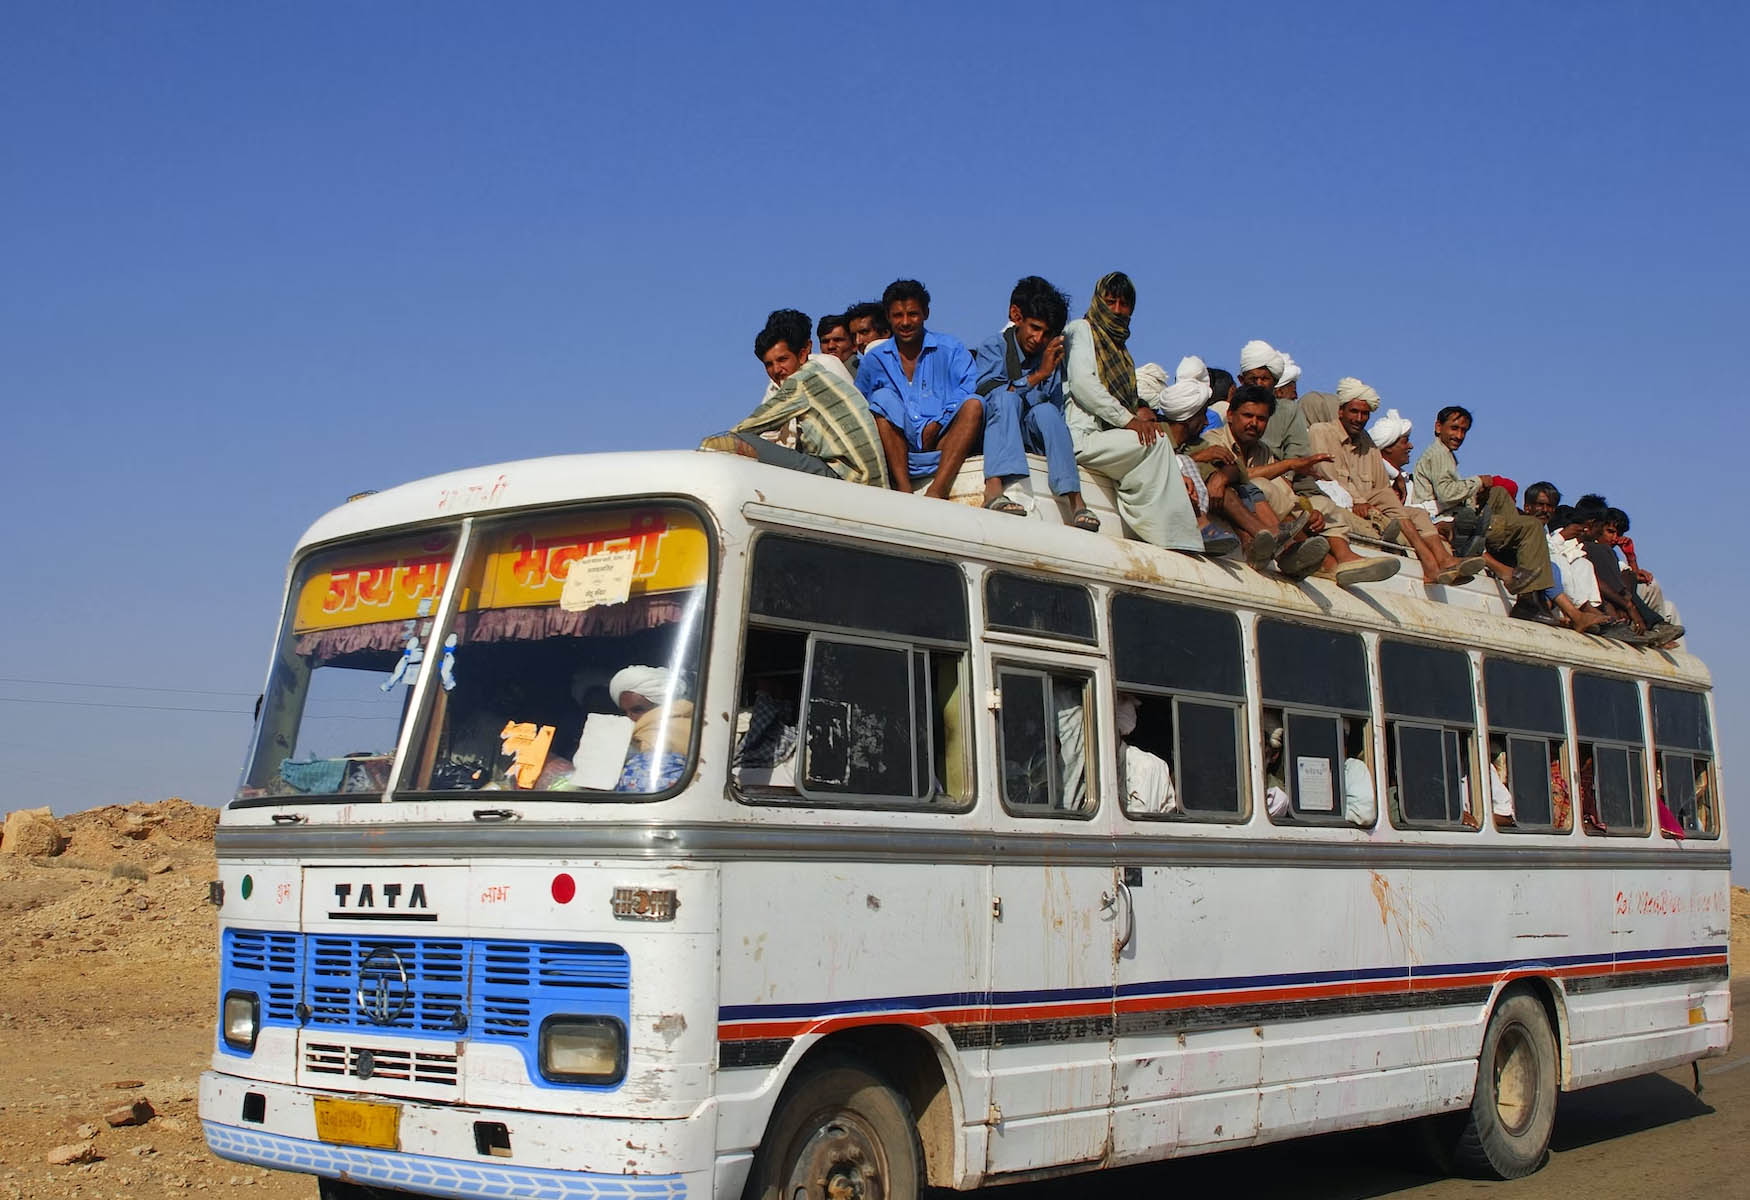 Bus Travel In India – Practical Tips For India Bus Travel